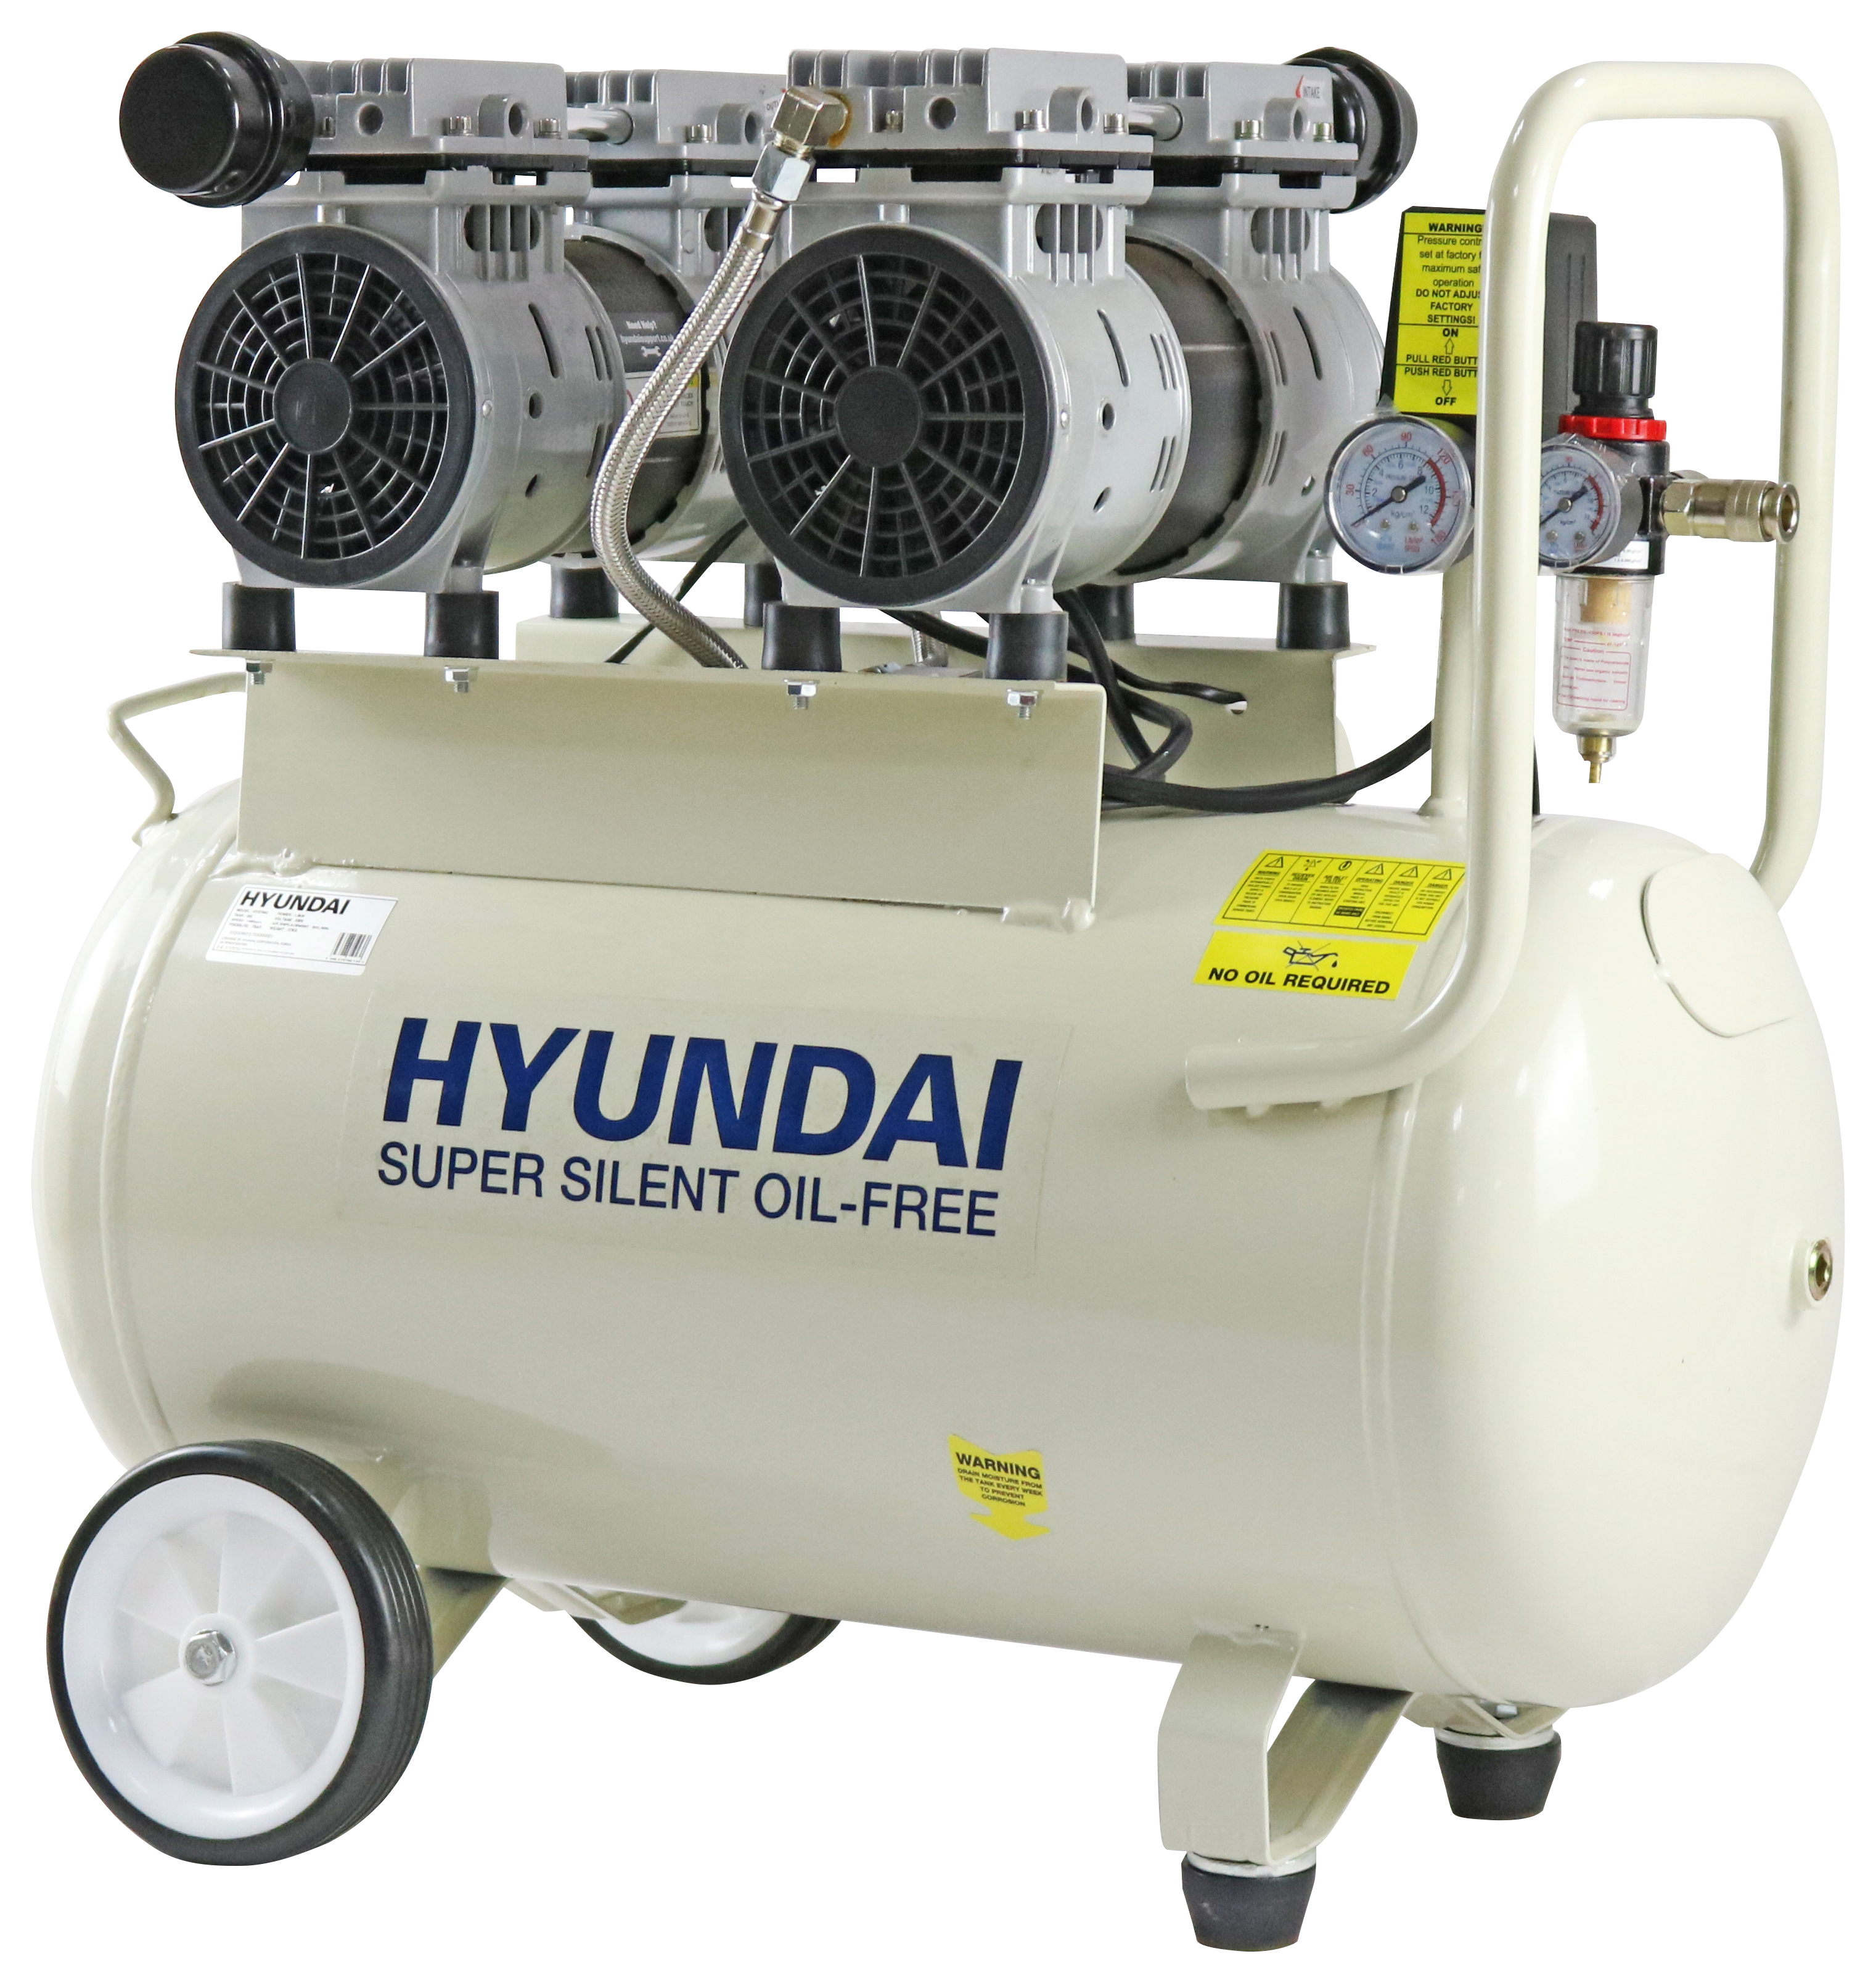 Image of Hyundai HY27550 50L OIL-FREE Low Noise Air Compressor - 1500W